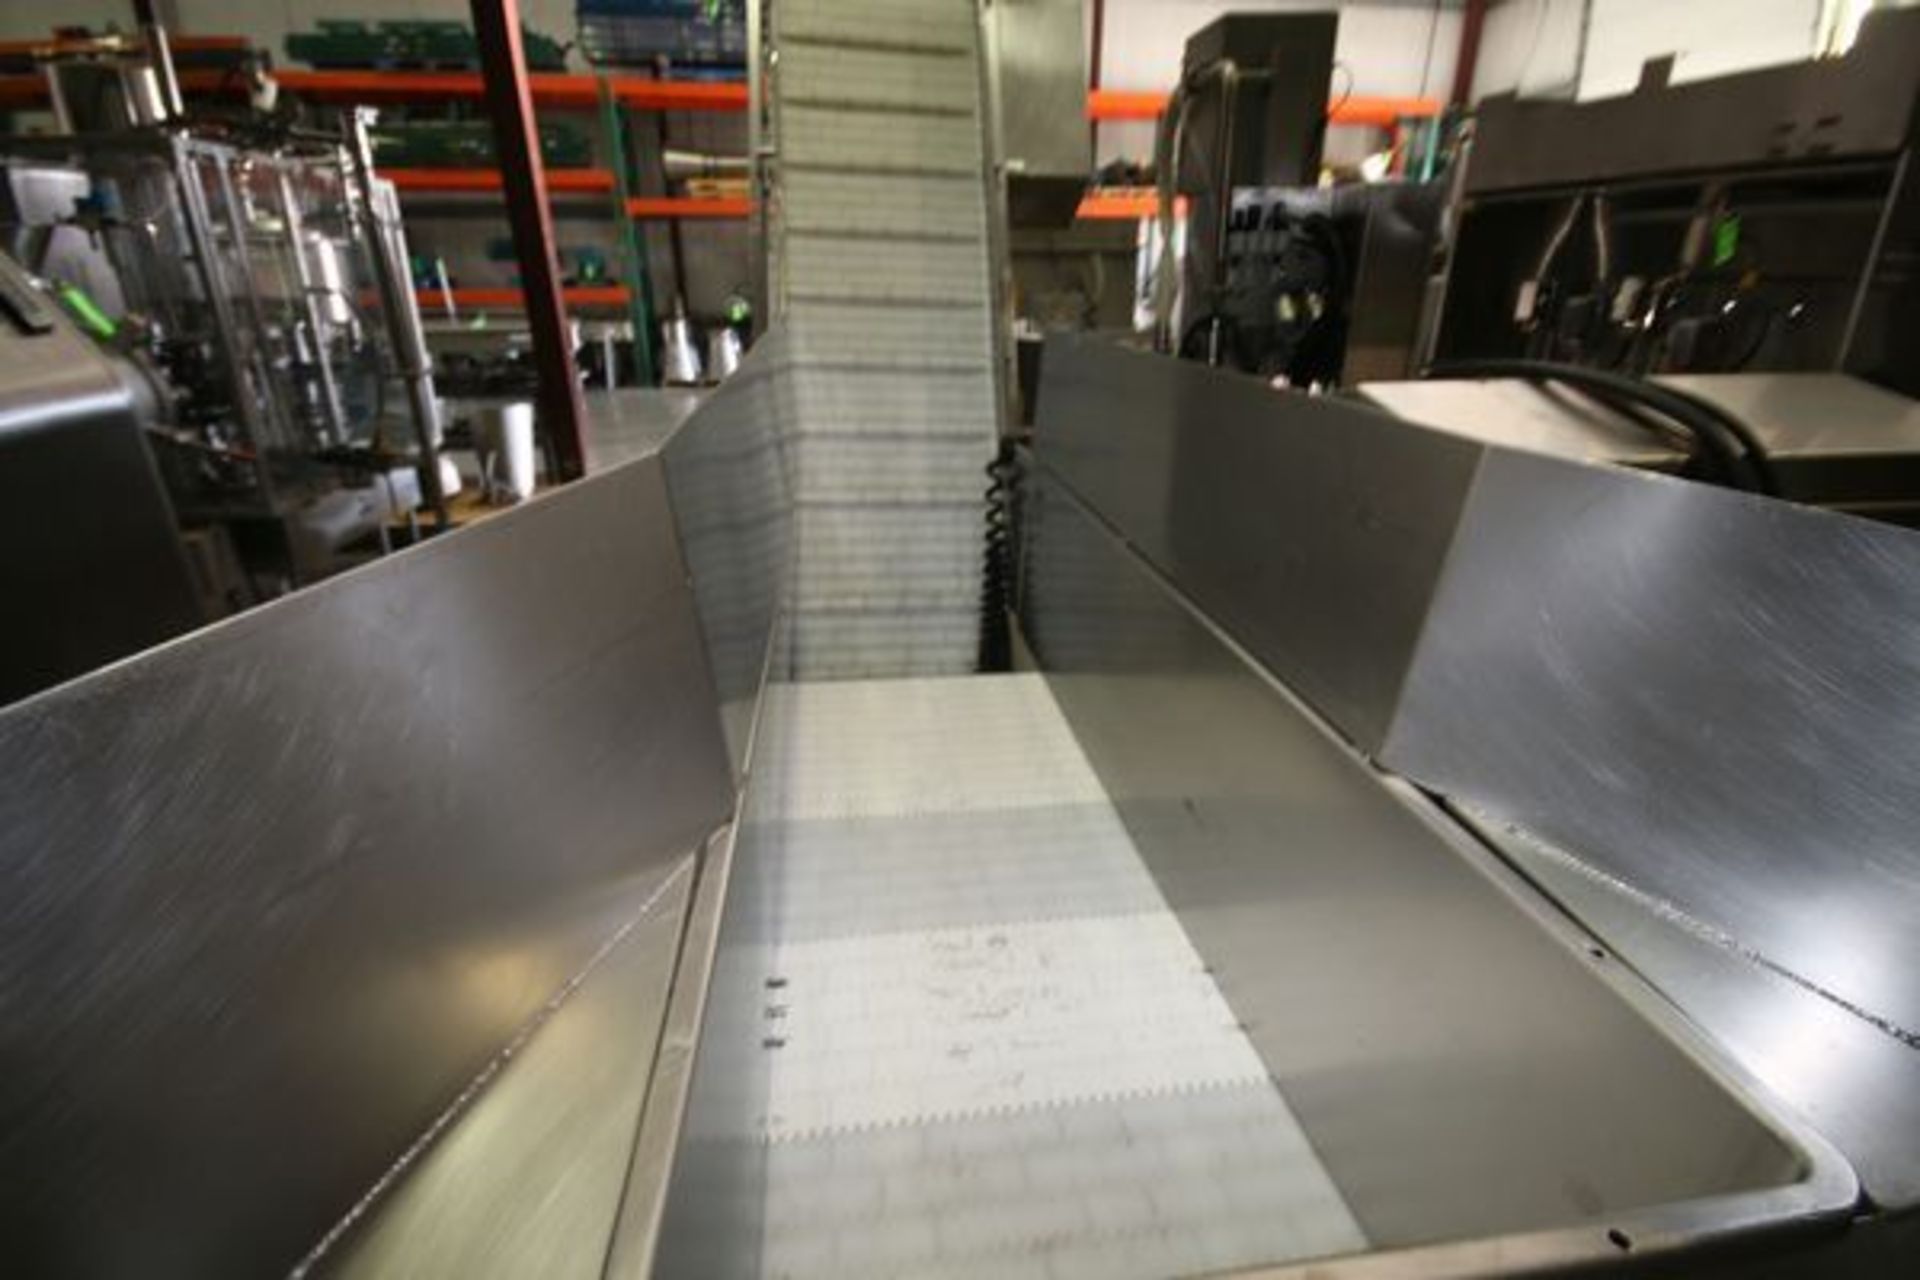 S/S Portable Product Hopper with Cleated Incline Conveyor (Product Elevating Conveyor), Mounted on - Image 3 of 3